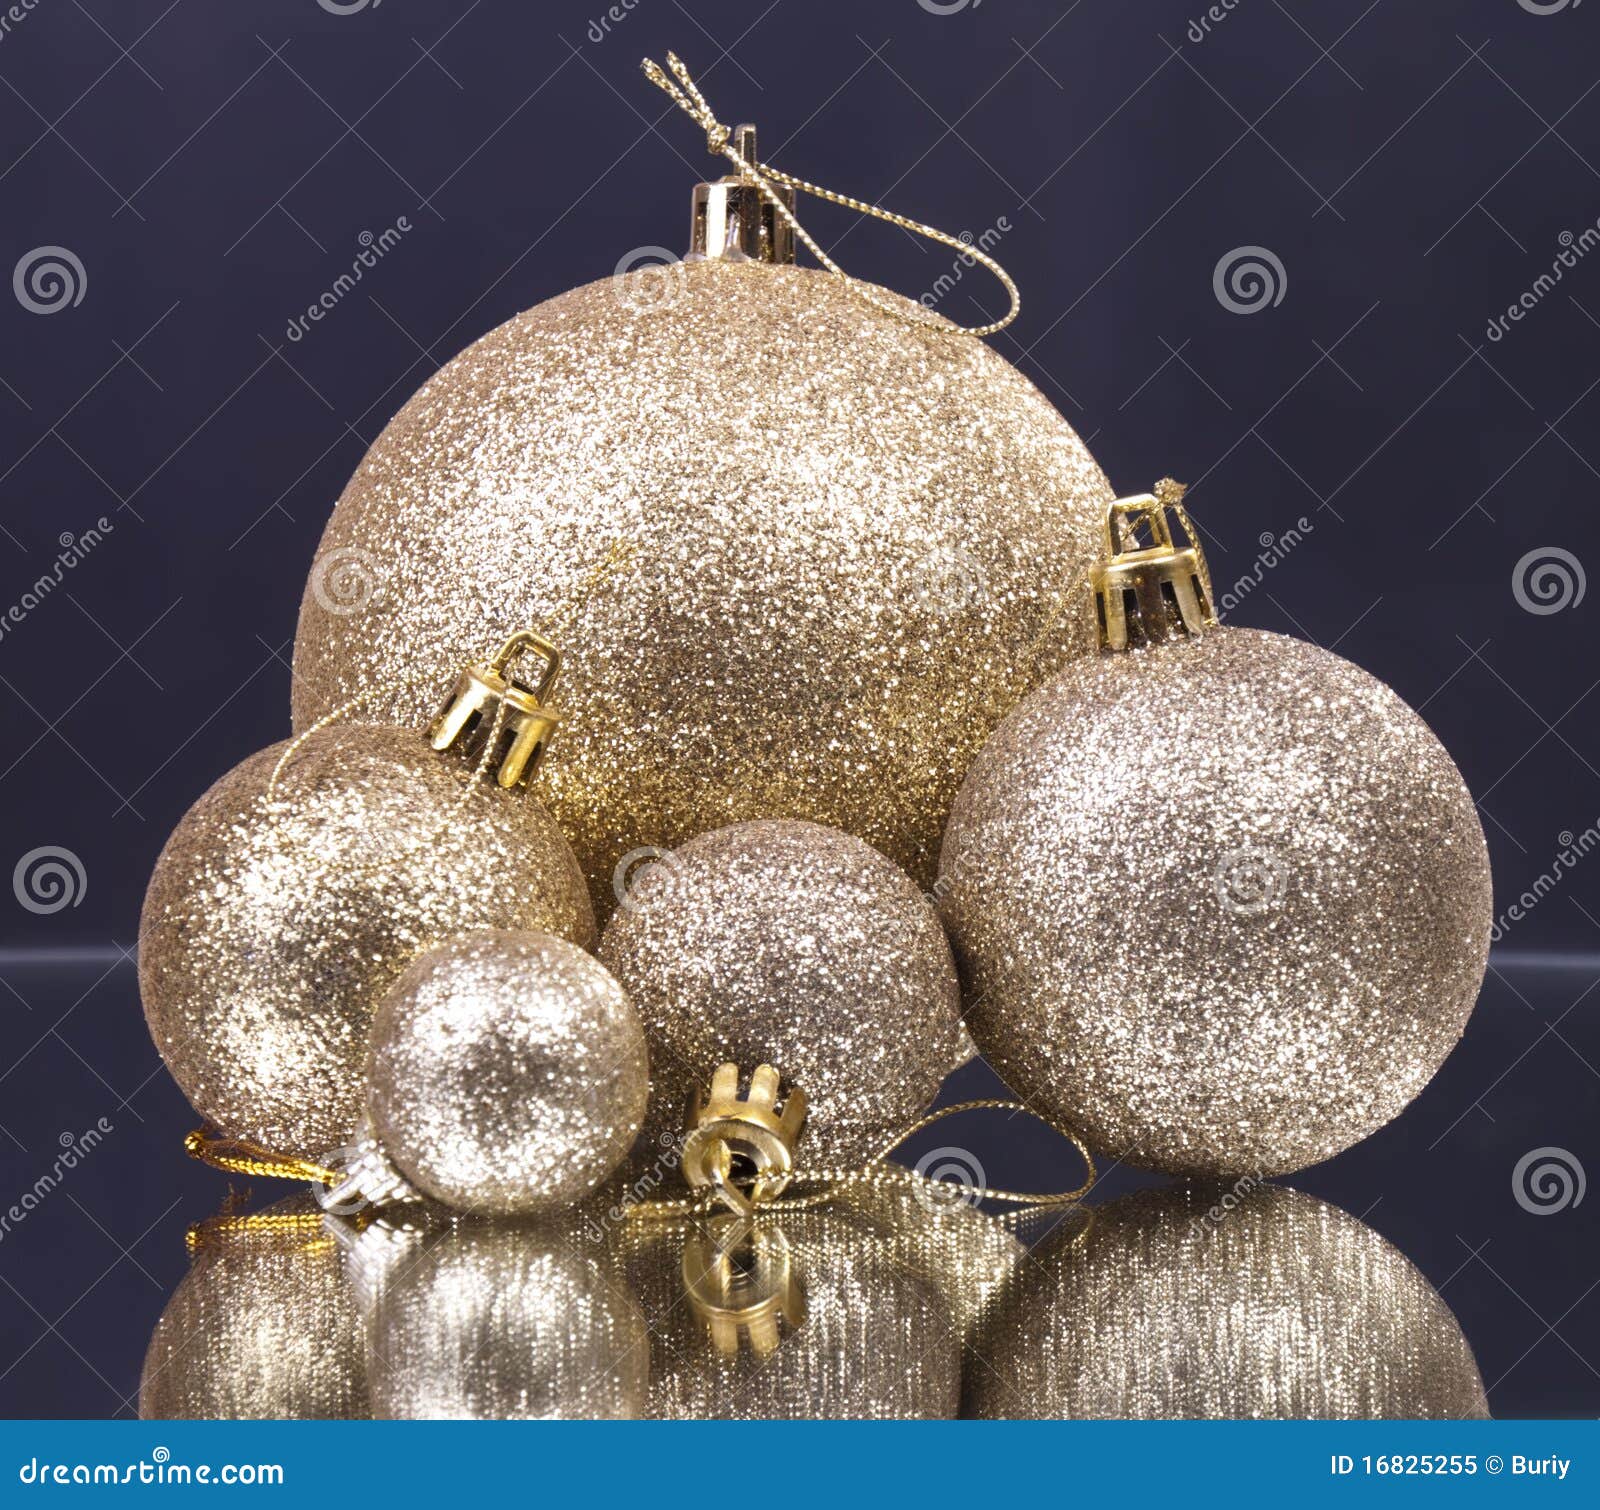 Christmas decorations stock image. Image of holiday, bright - 16825255